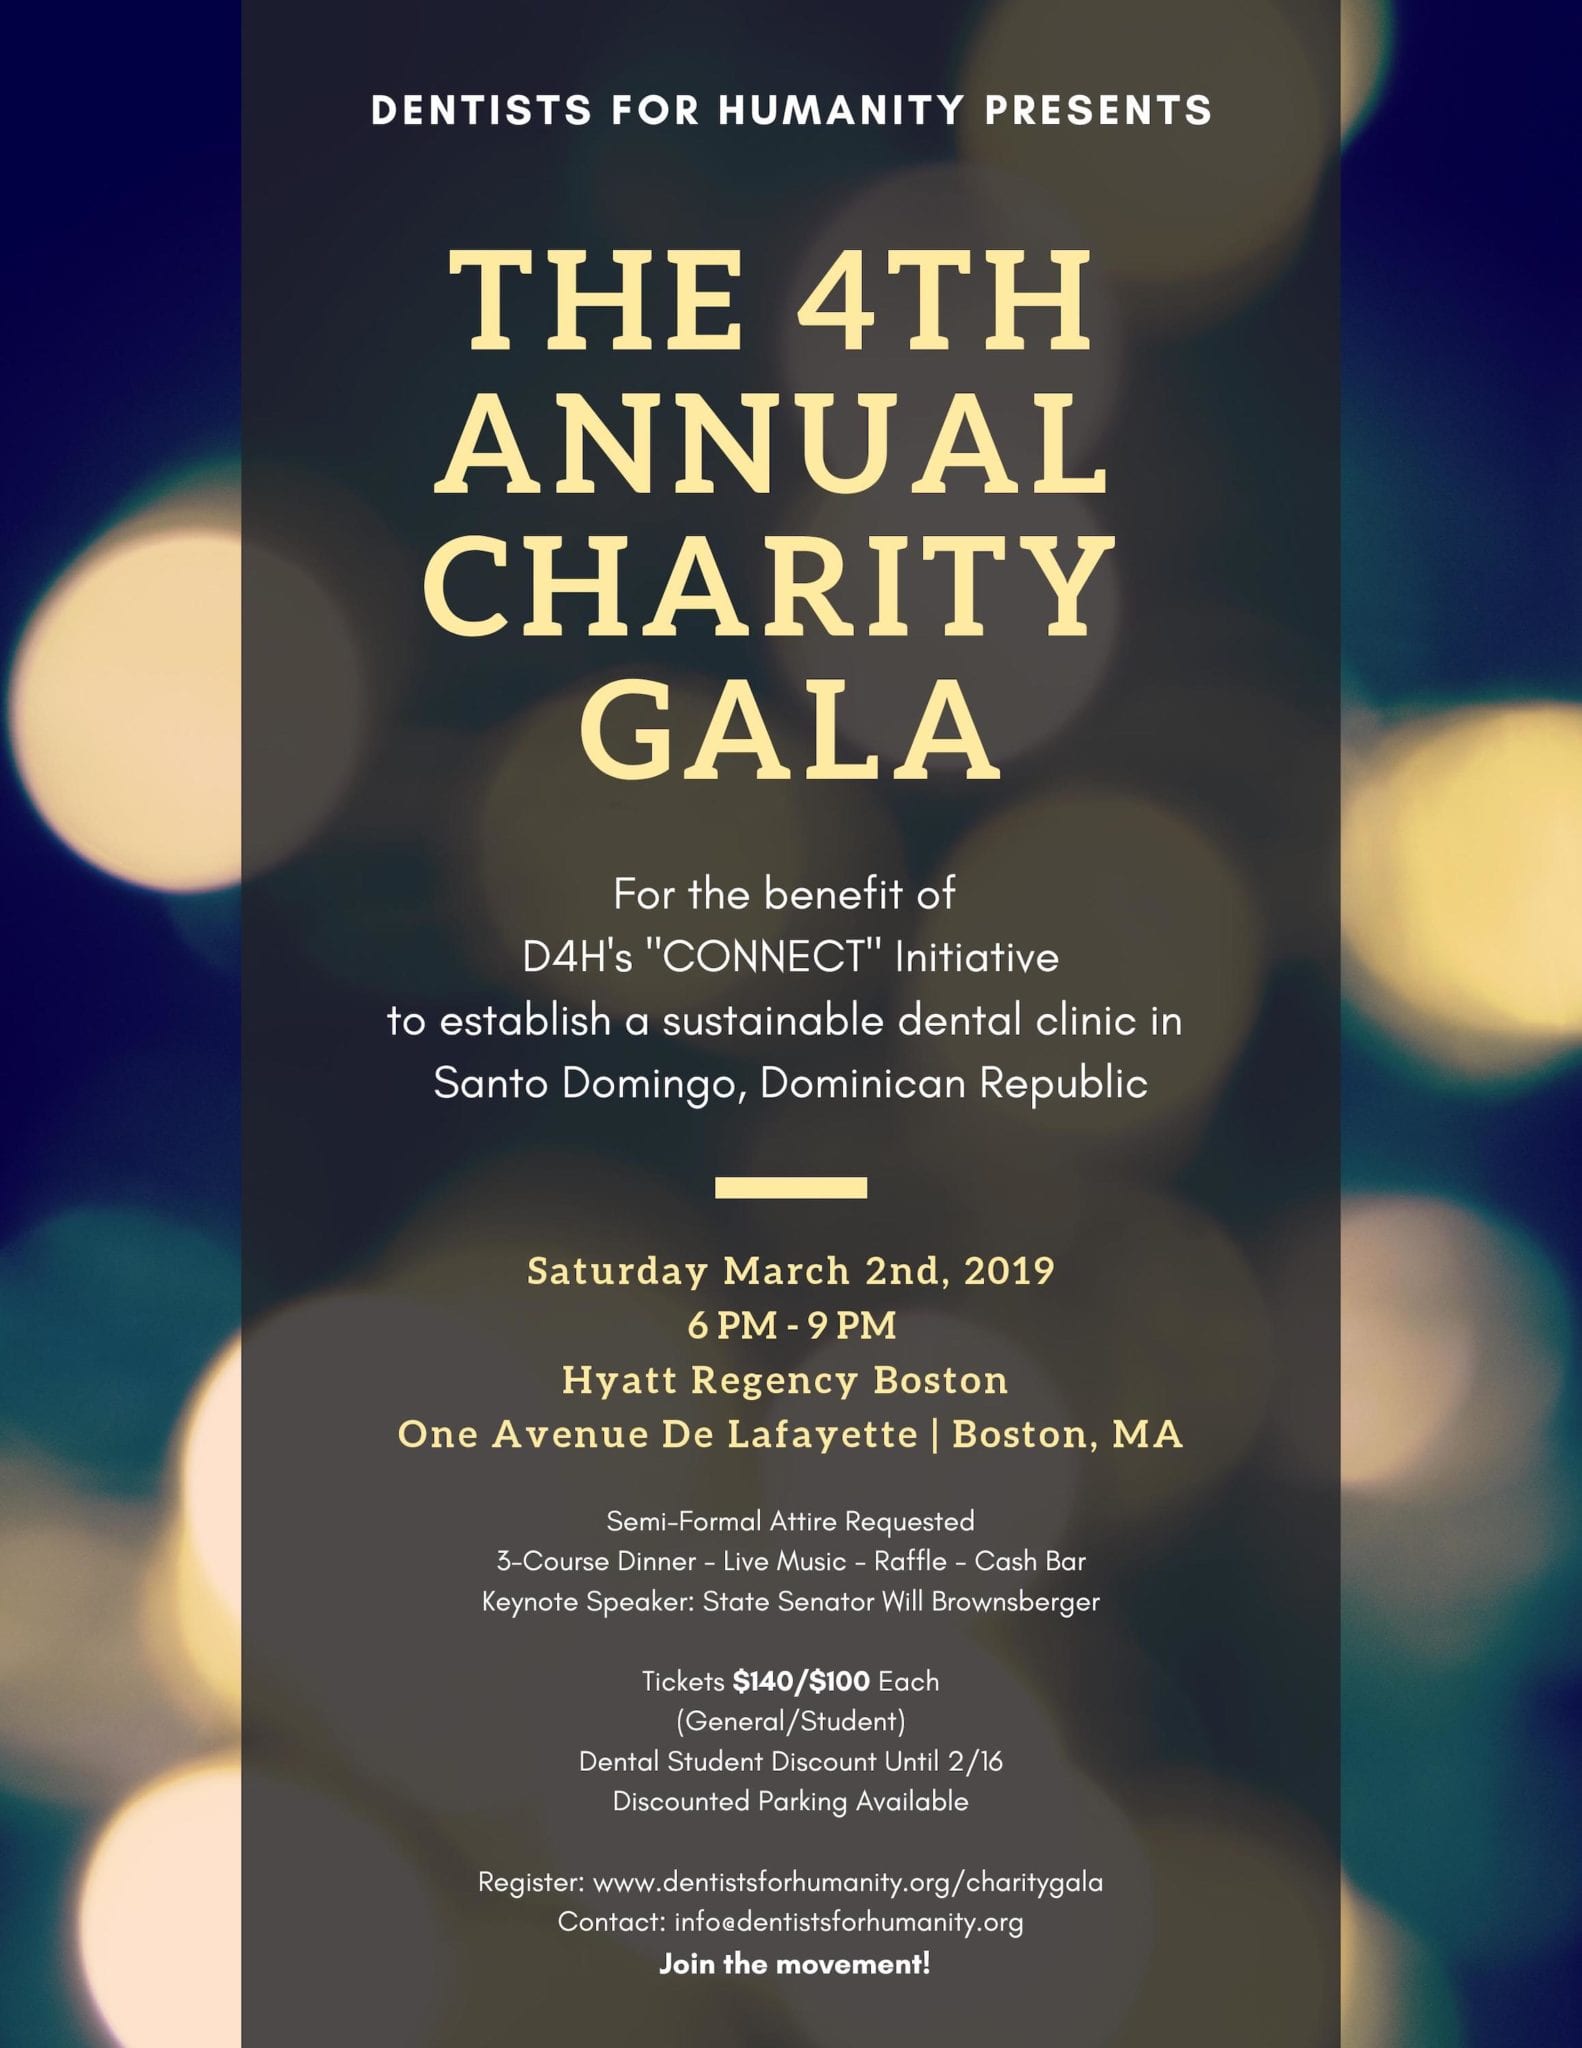 Dentists For Humanity's 4th Annual Charity Gala